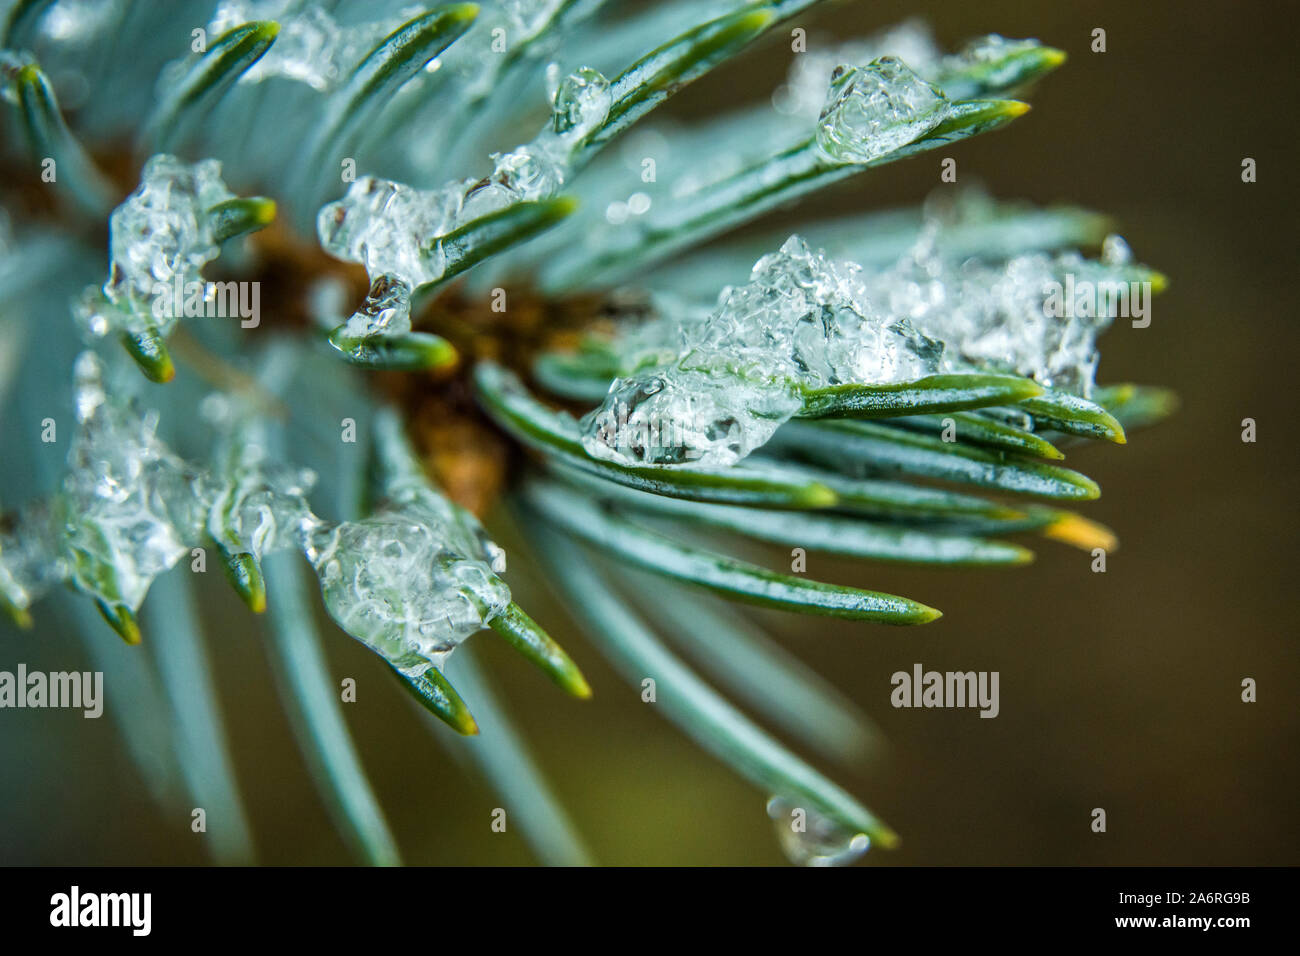 Ice on conifer green needles, close-up view Stock Photo